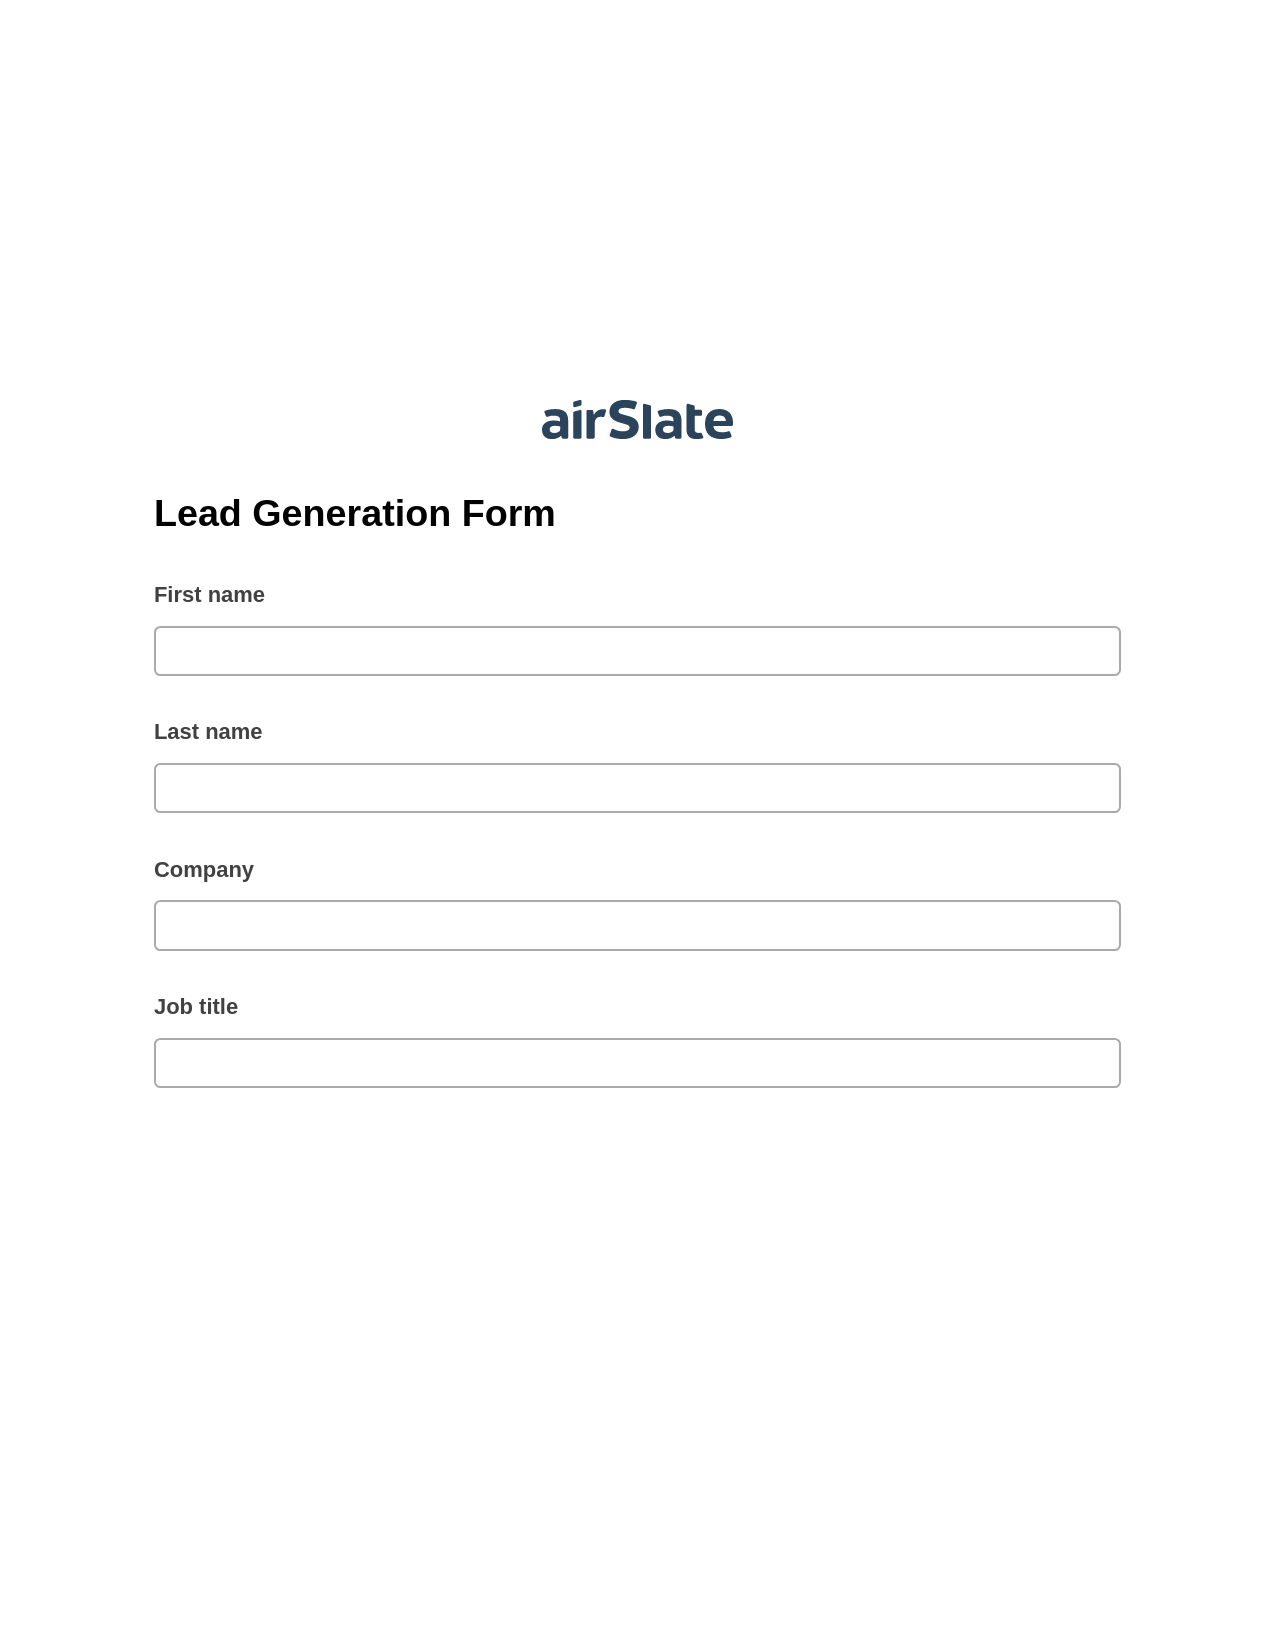 Lead Generation Form Pre-fill from Salesforce Records with SOQL Bot, Send a Slate with Roles Bot, Email Notification Postfinish Bot